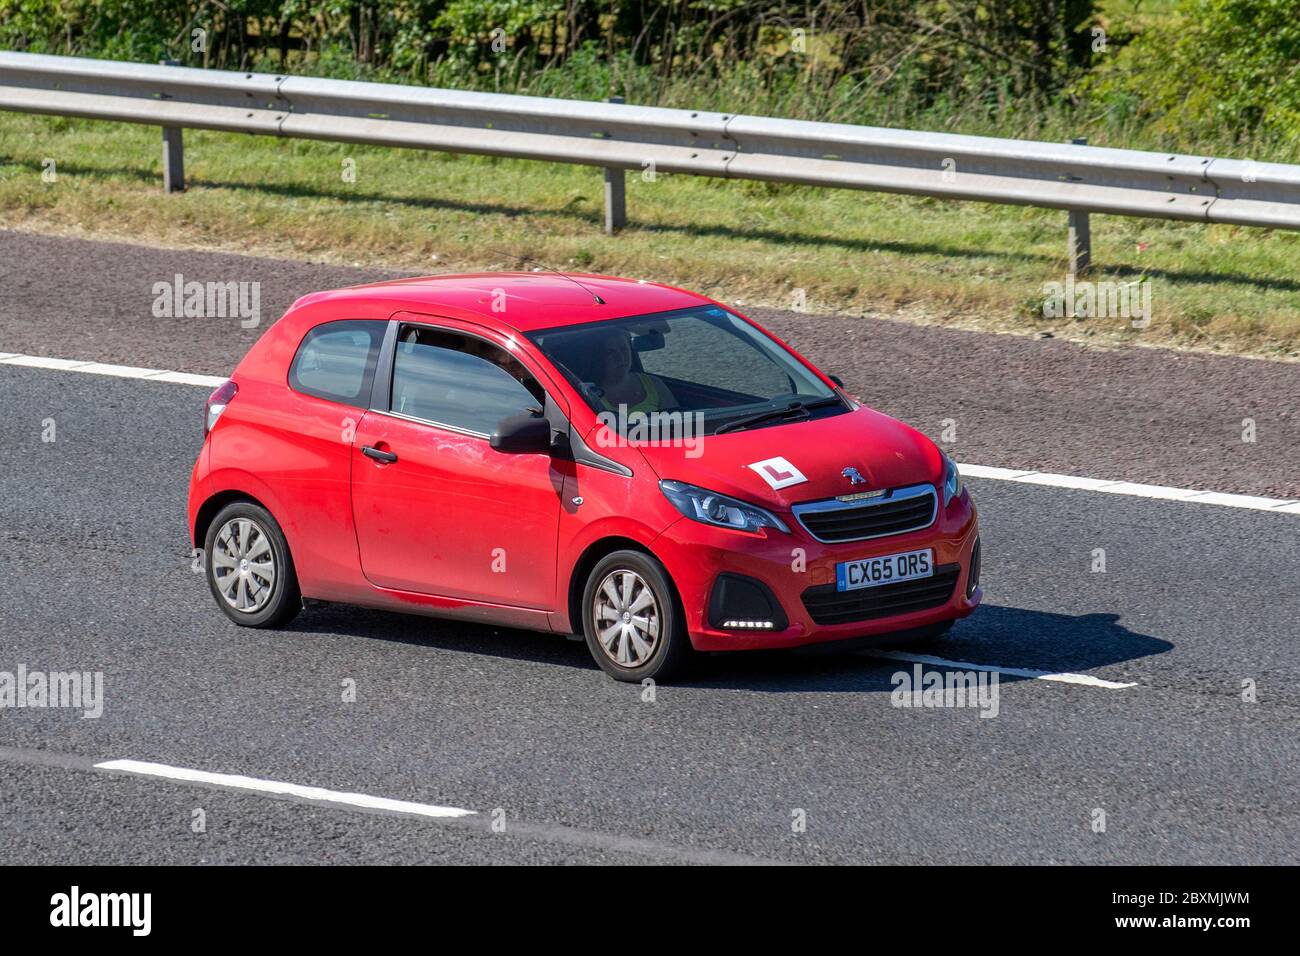 2015 red Peugeot 108 Access; Learner driver motorway training, under instruction, driving school, drivers, motorway driving lessons, approved driving instructor, supervised tution, instructor; Vehicular traffic L plates on moving vehicles, driving vehicle on UK roads, motors, motoring on the M6 motorway highway Stock Photo